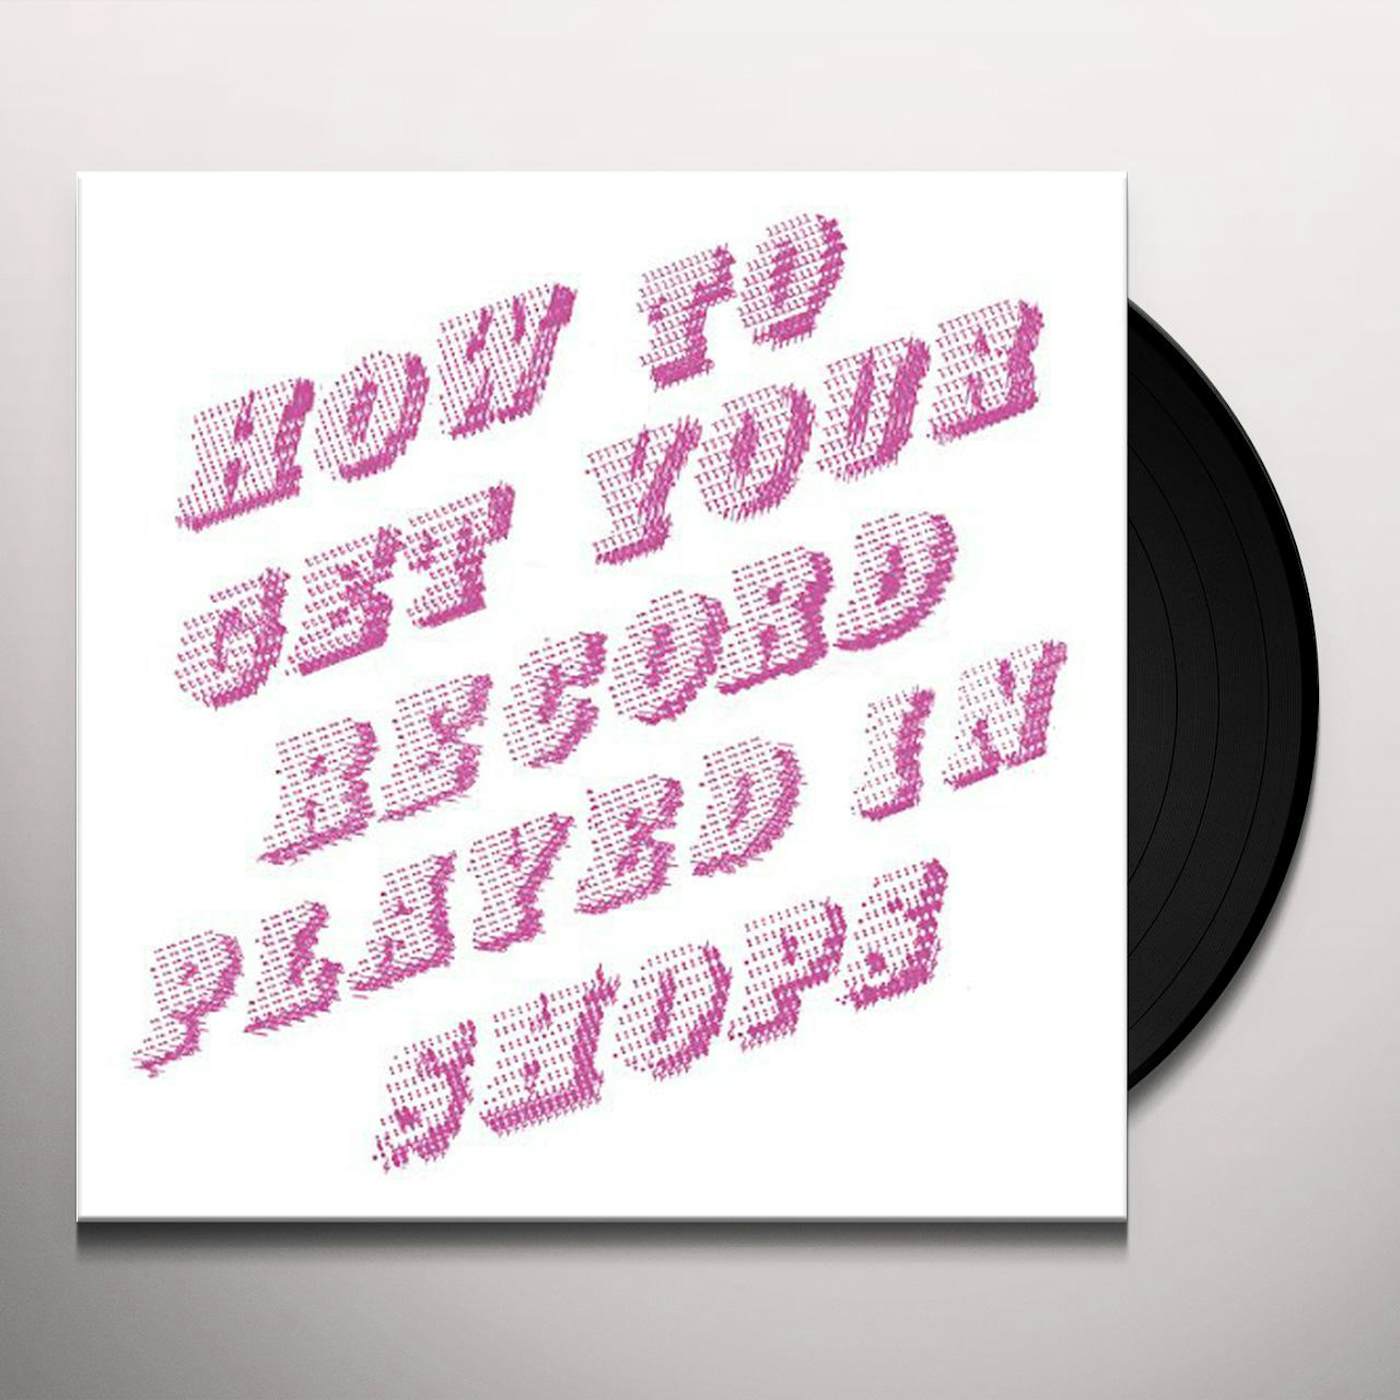 Mike Donovan How To Get Your Record Played in Shops Vinyl Record